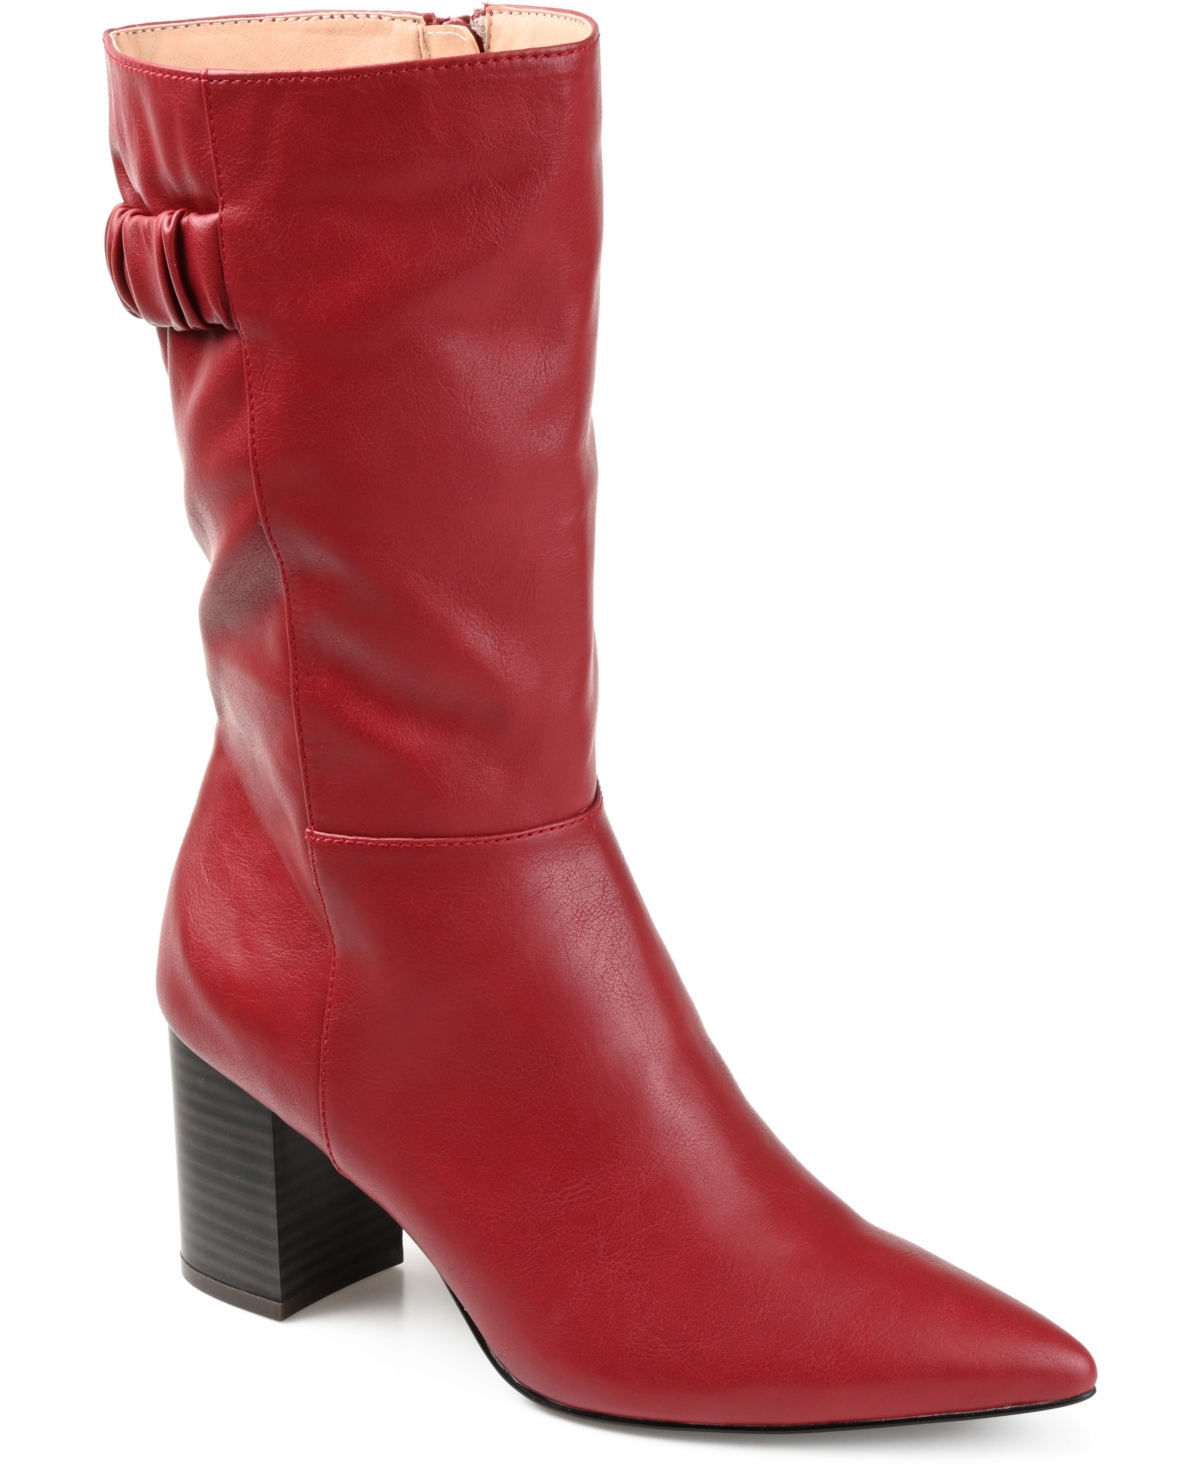 80s Shoes, Sneakers, Boots, Heels, Jelly Flats | 1980s Shoes Journee Collection Womens Wilo Wide Calf Boots - Red $99.99 AT vintagedancer.com